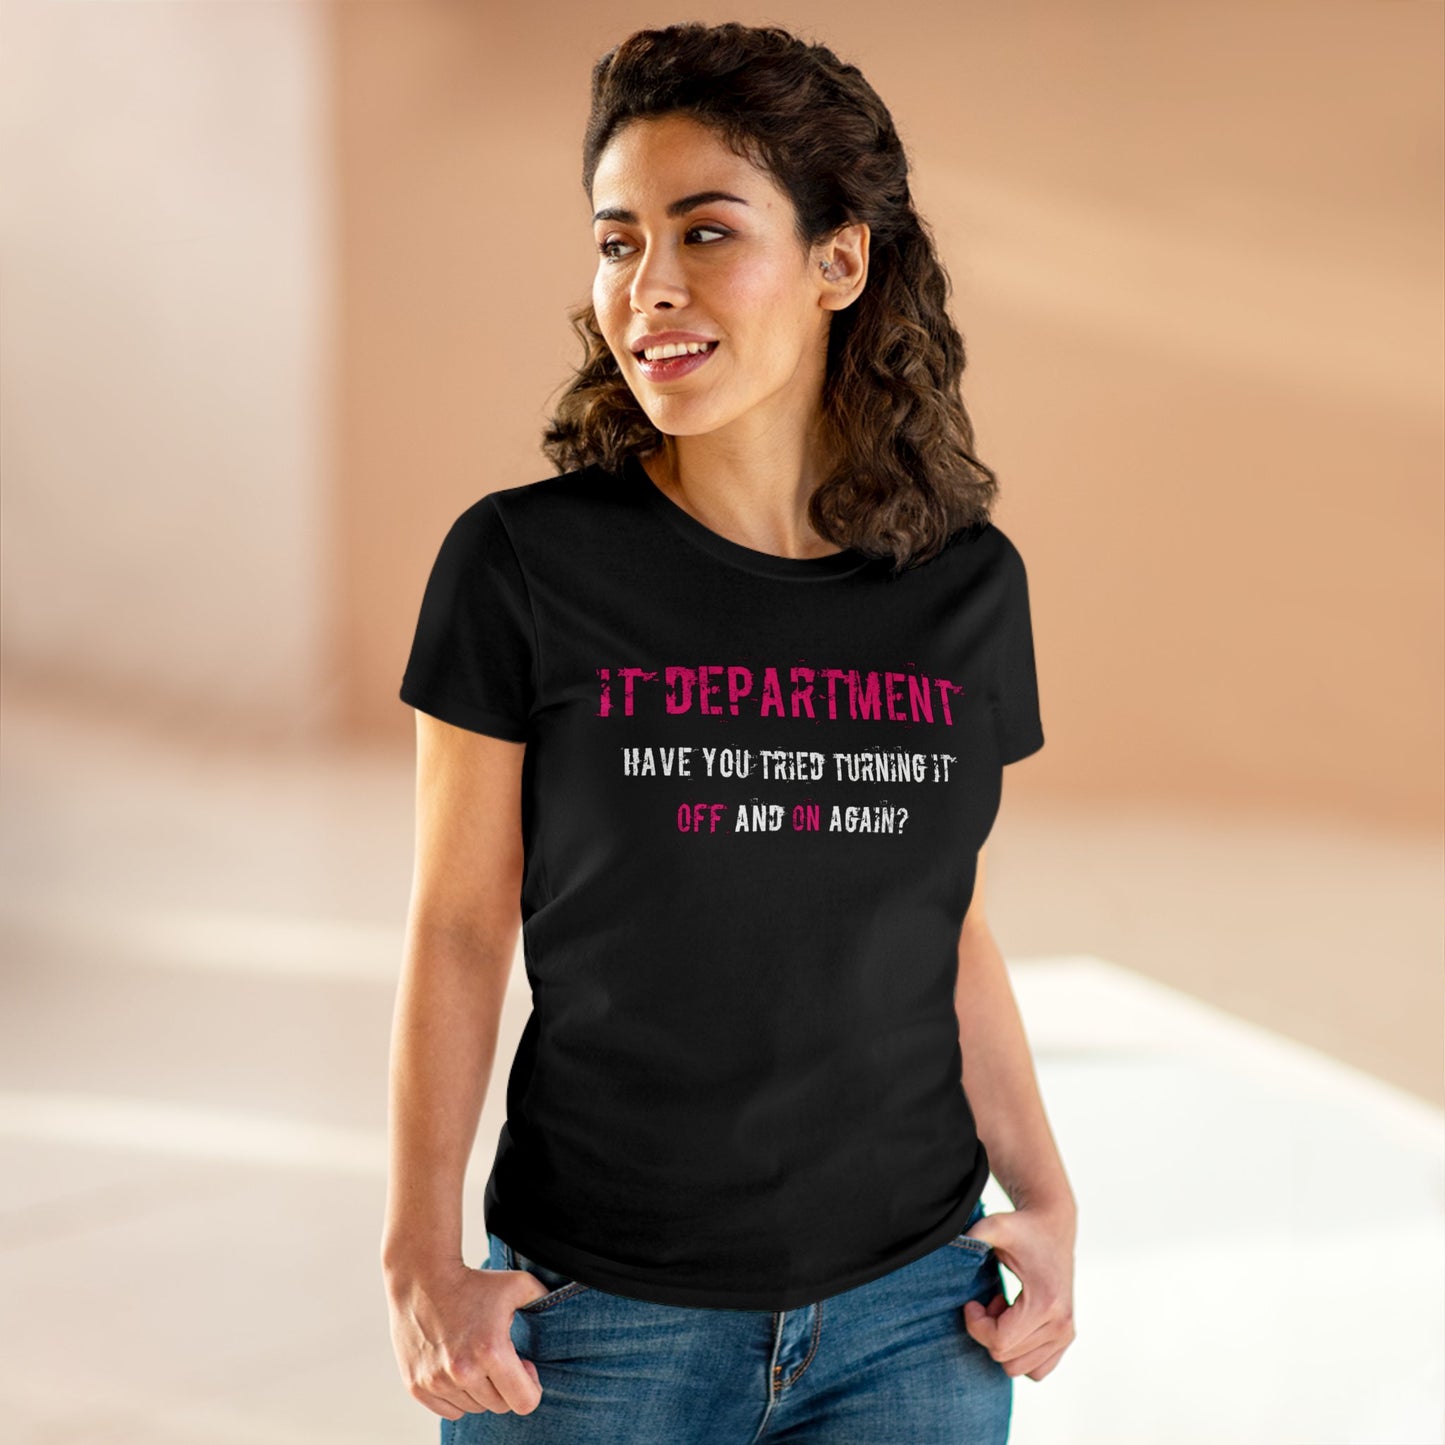 Women's T-shirt IT Support in Pink - Frogos Design